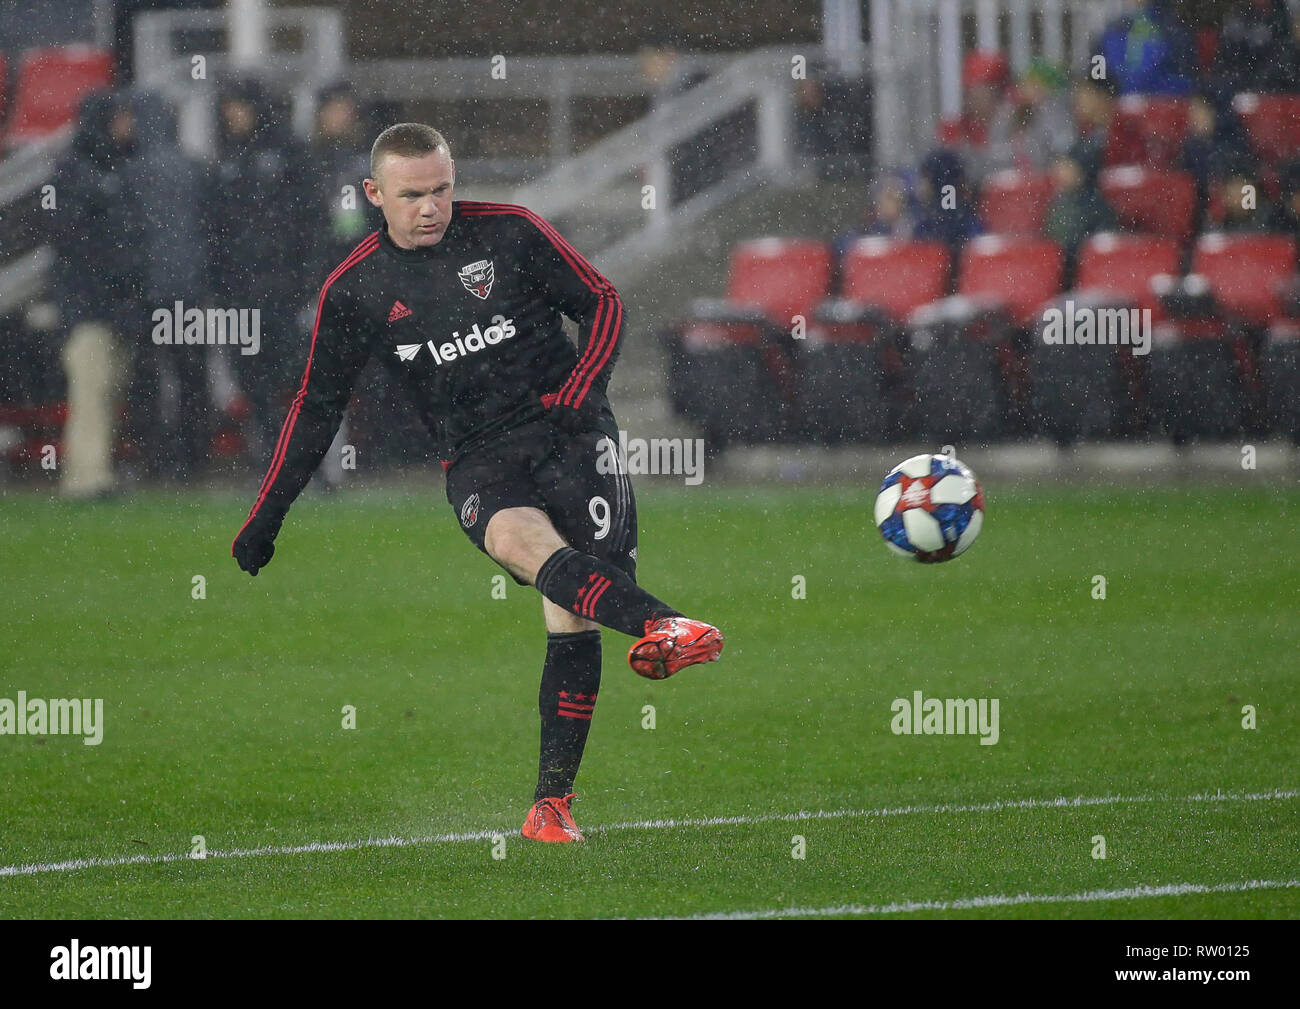 Washington DC, USA. 3rd Mar, 2019. D.C. United Forward (9) Wayne Rooney warms up before an MLS soccer match between the D.C. United and the Atlanta United FC at Audi Field in Washington DC. Justin Cooper/CSM/Alamy Live News Stock Photo